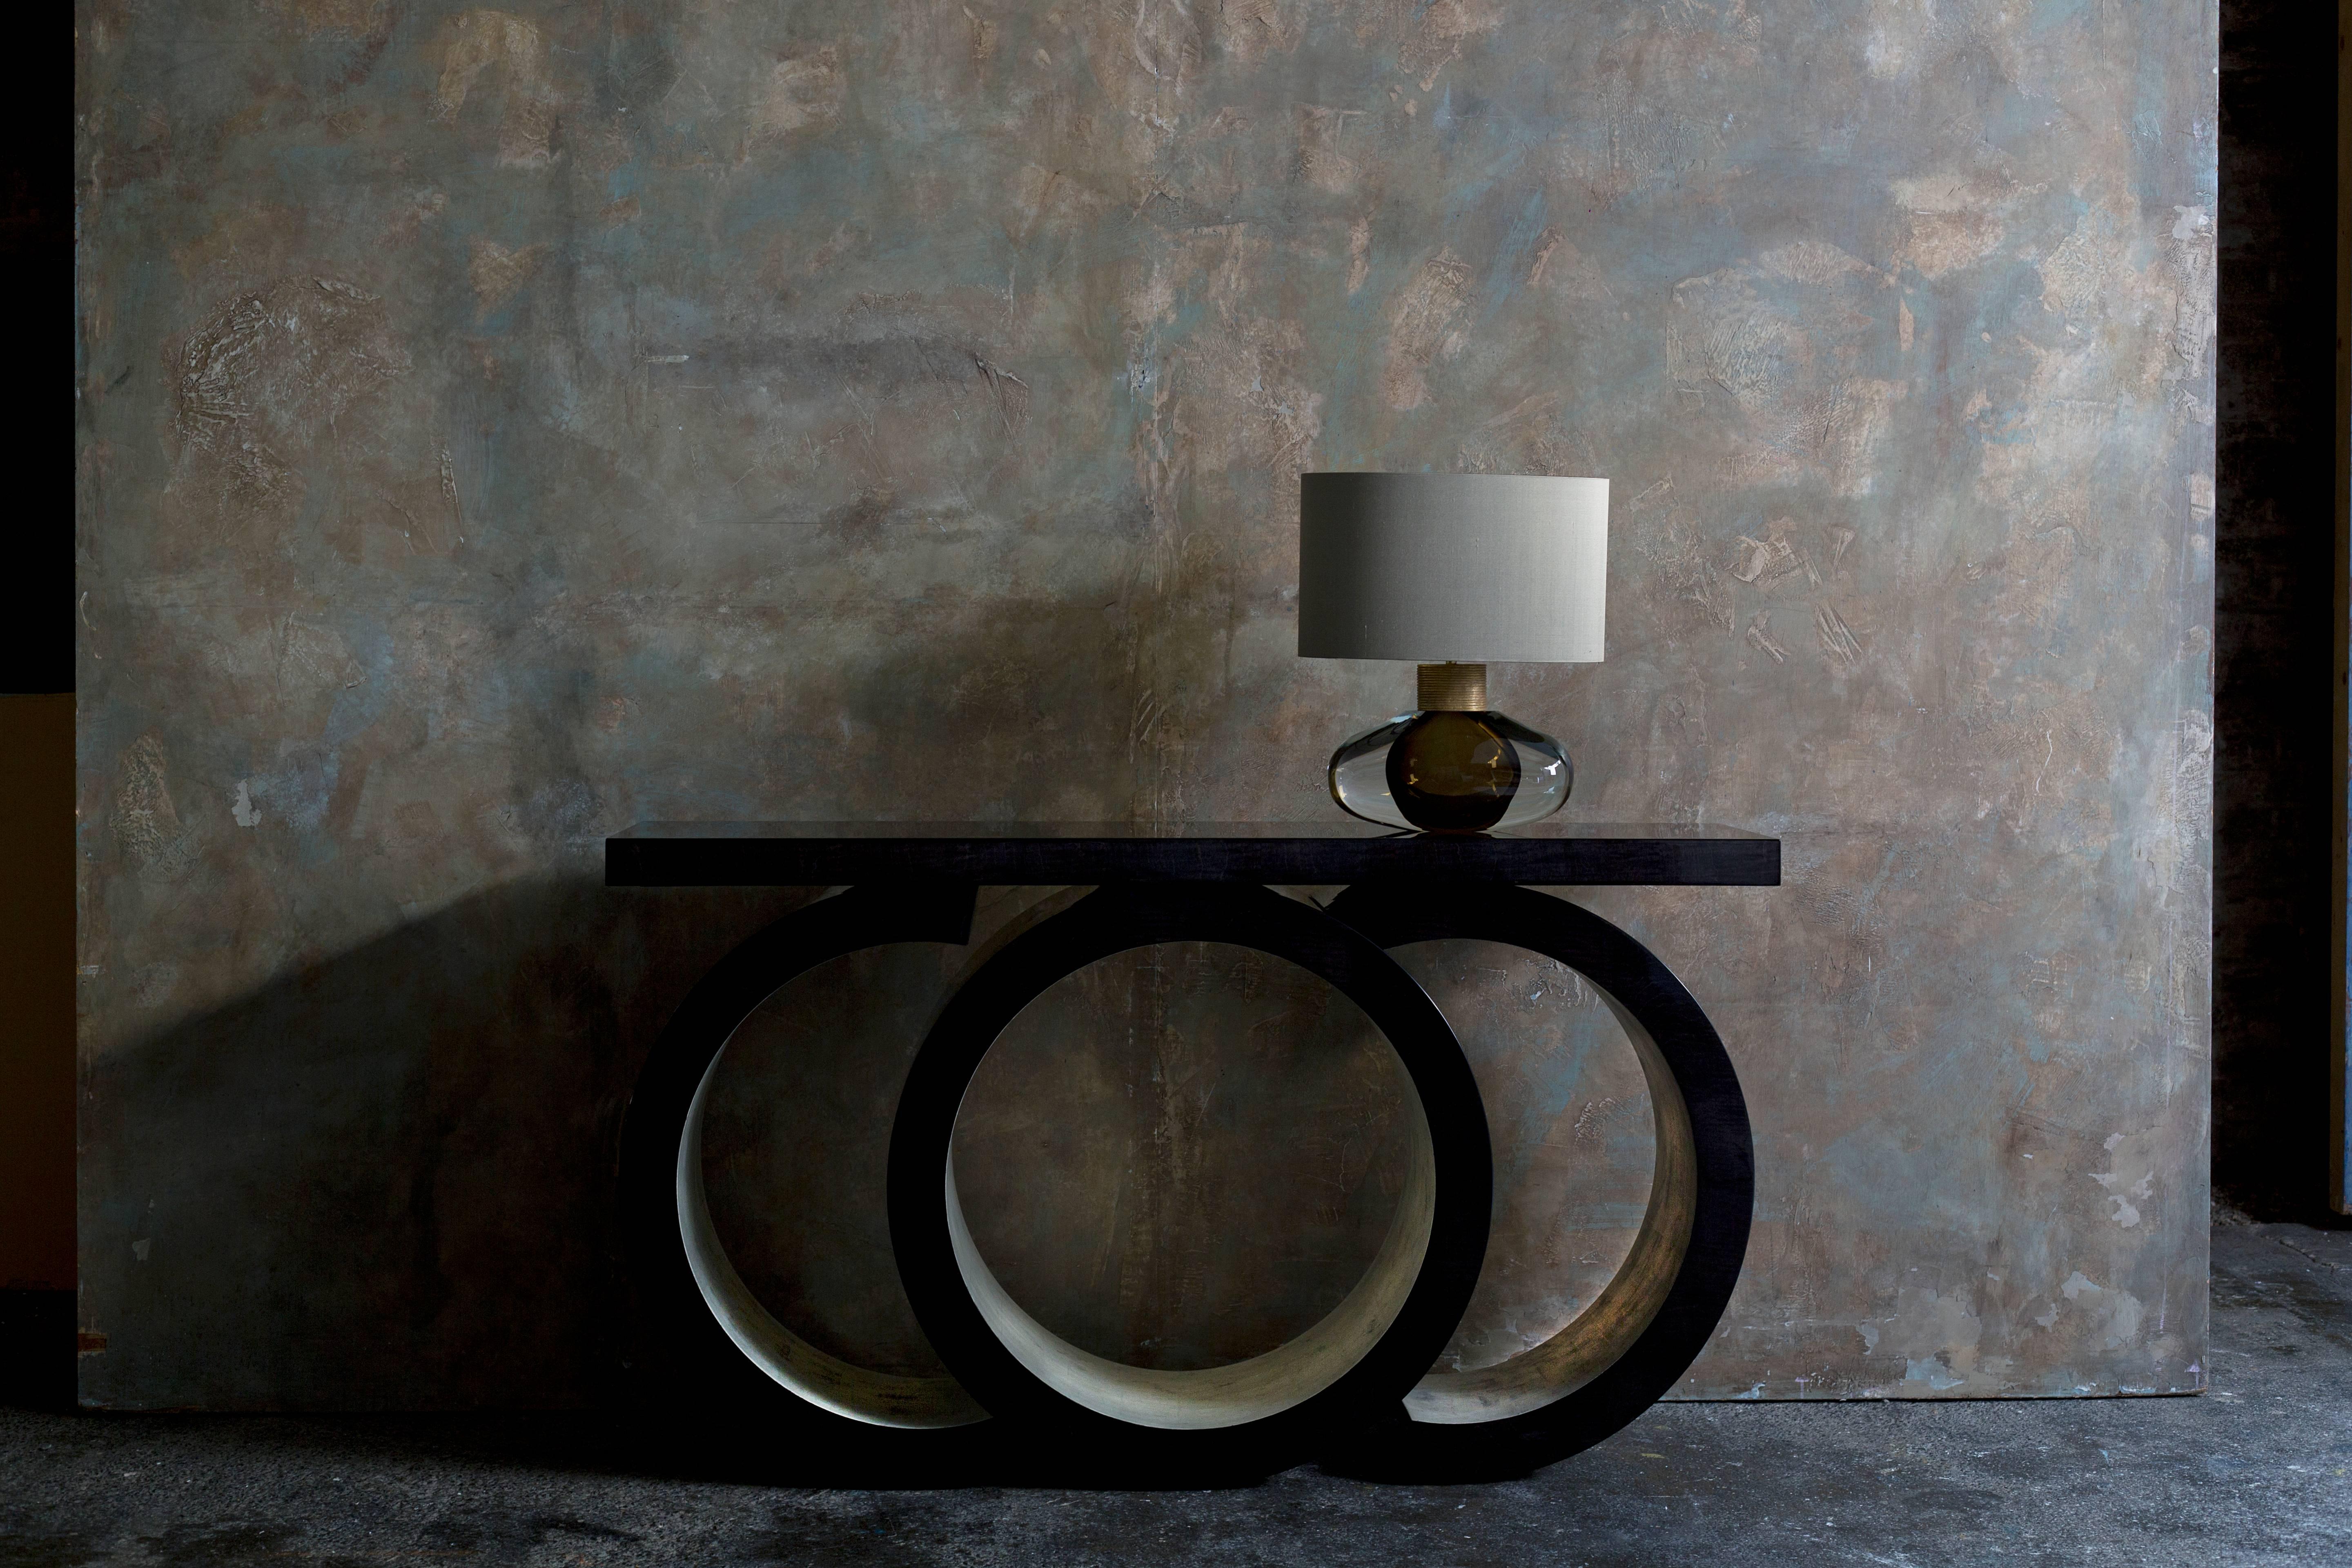 A magnificent console table finished in high sycamore black and white gold leaf.

With its unique pedestal formed of two elegant arcs surrounding a defiant central cylinder, this extraordinary piece will transform any room by its sheer presence and